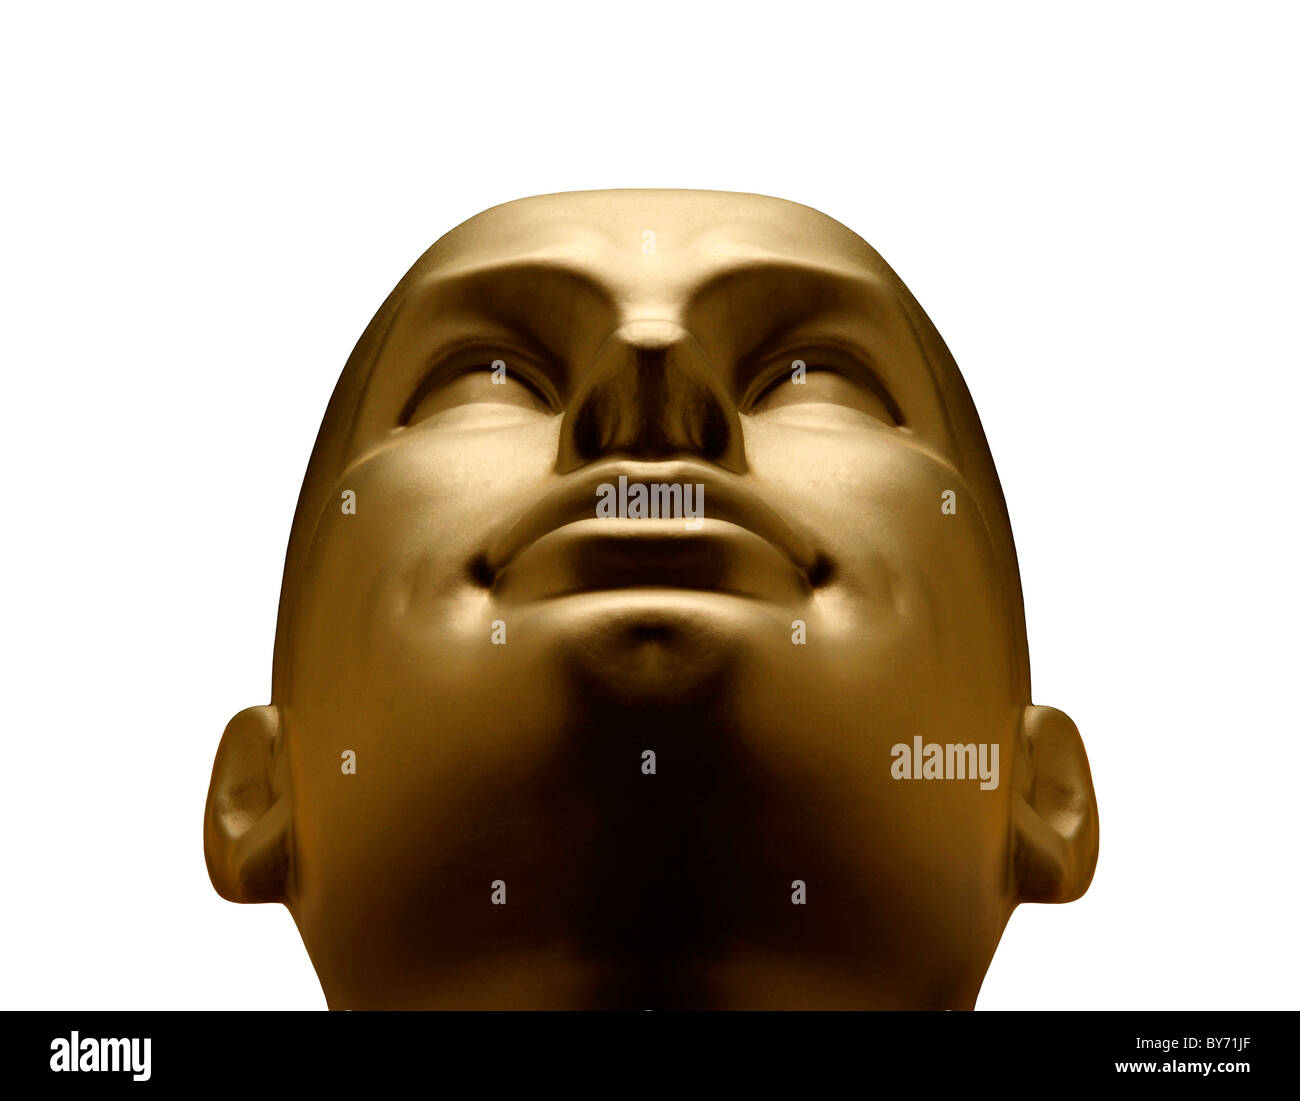 Gold mannequin head looking up against white background Stock Photo